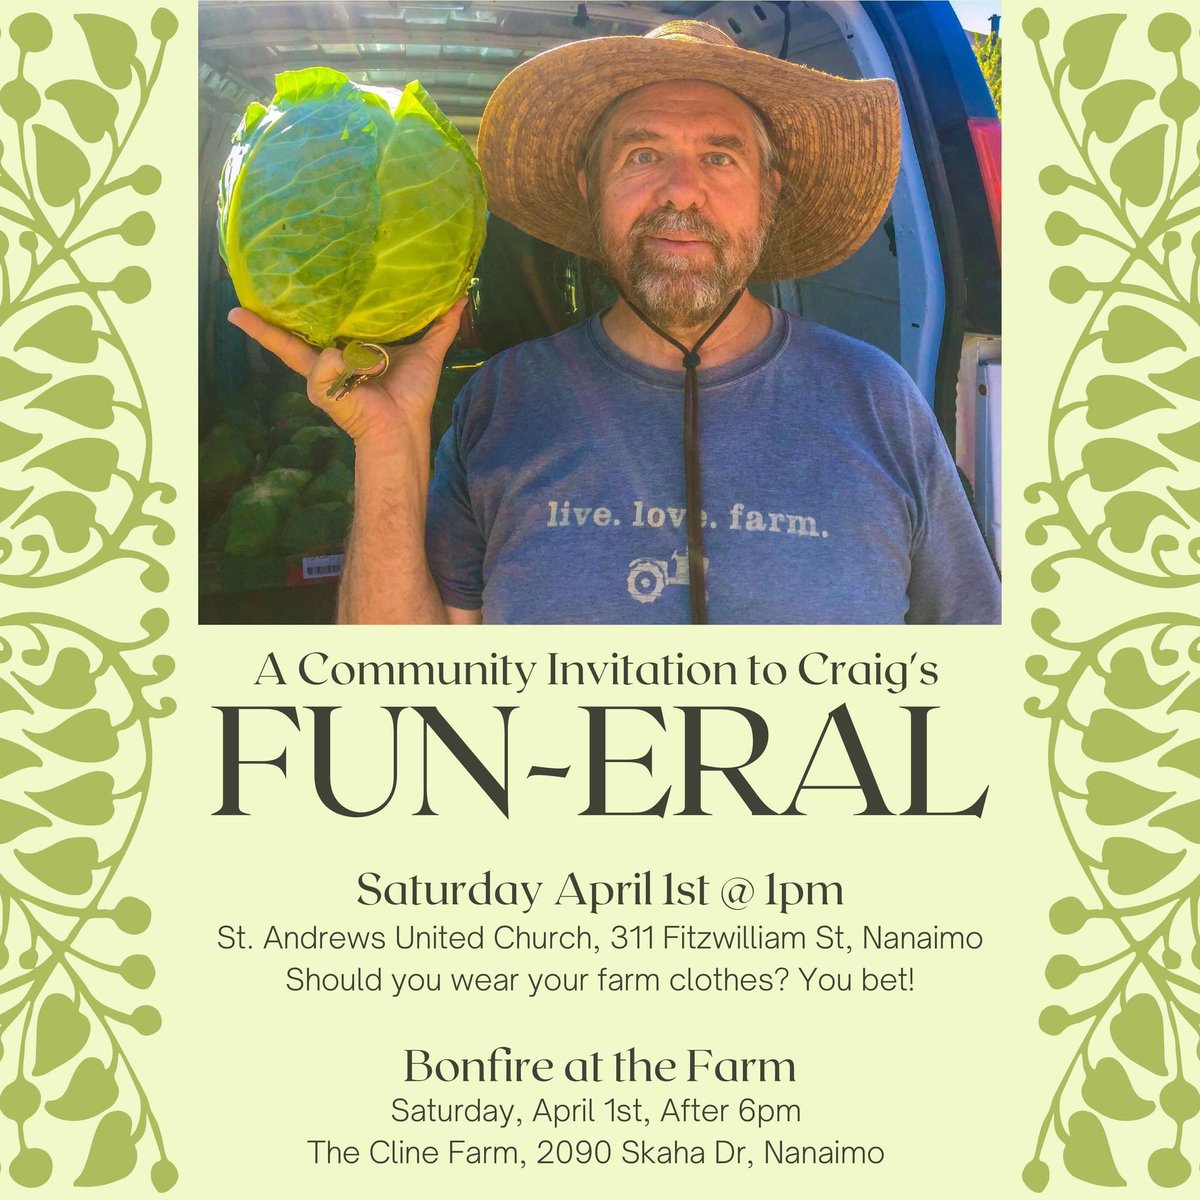 Sharing for our friends at #GrowingOpportunities Farm Community Co-op - they’re hosting a FUN-eral in Craig Evans’ honour on April 1st! 🌱❤️ #CelebrationOfLife